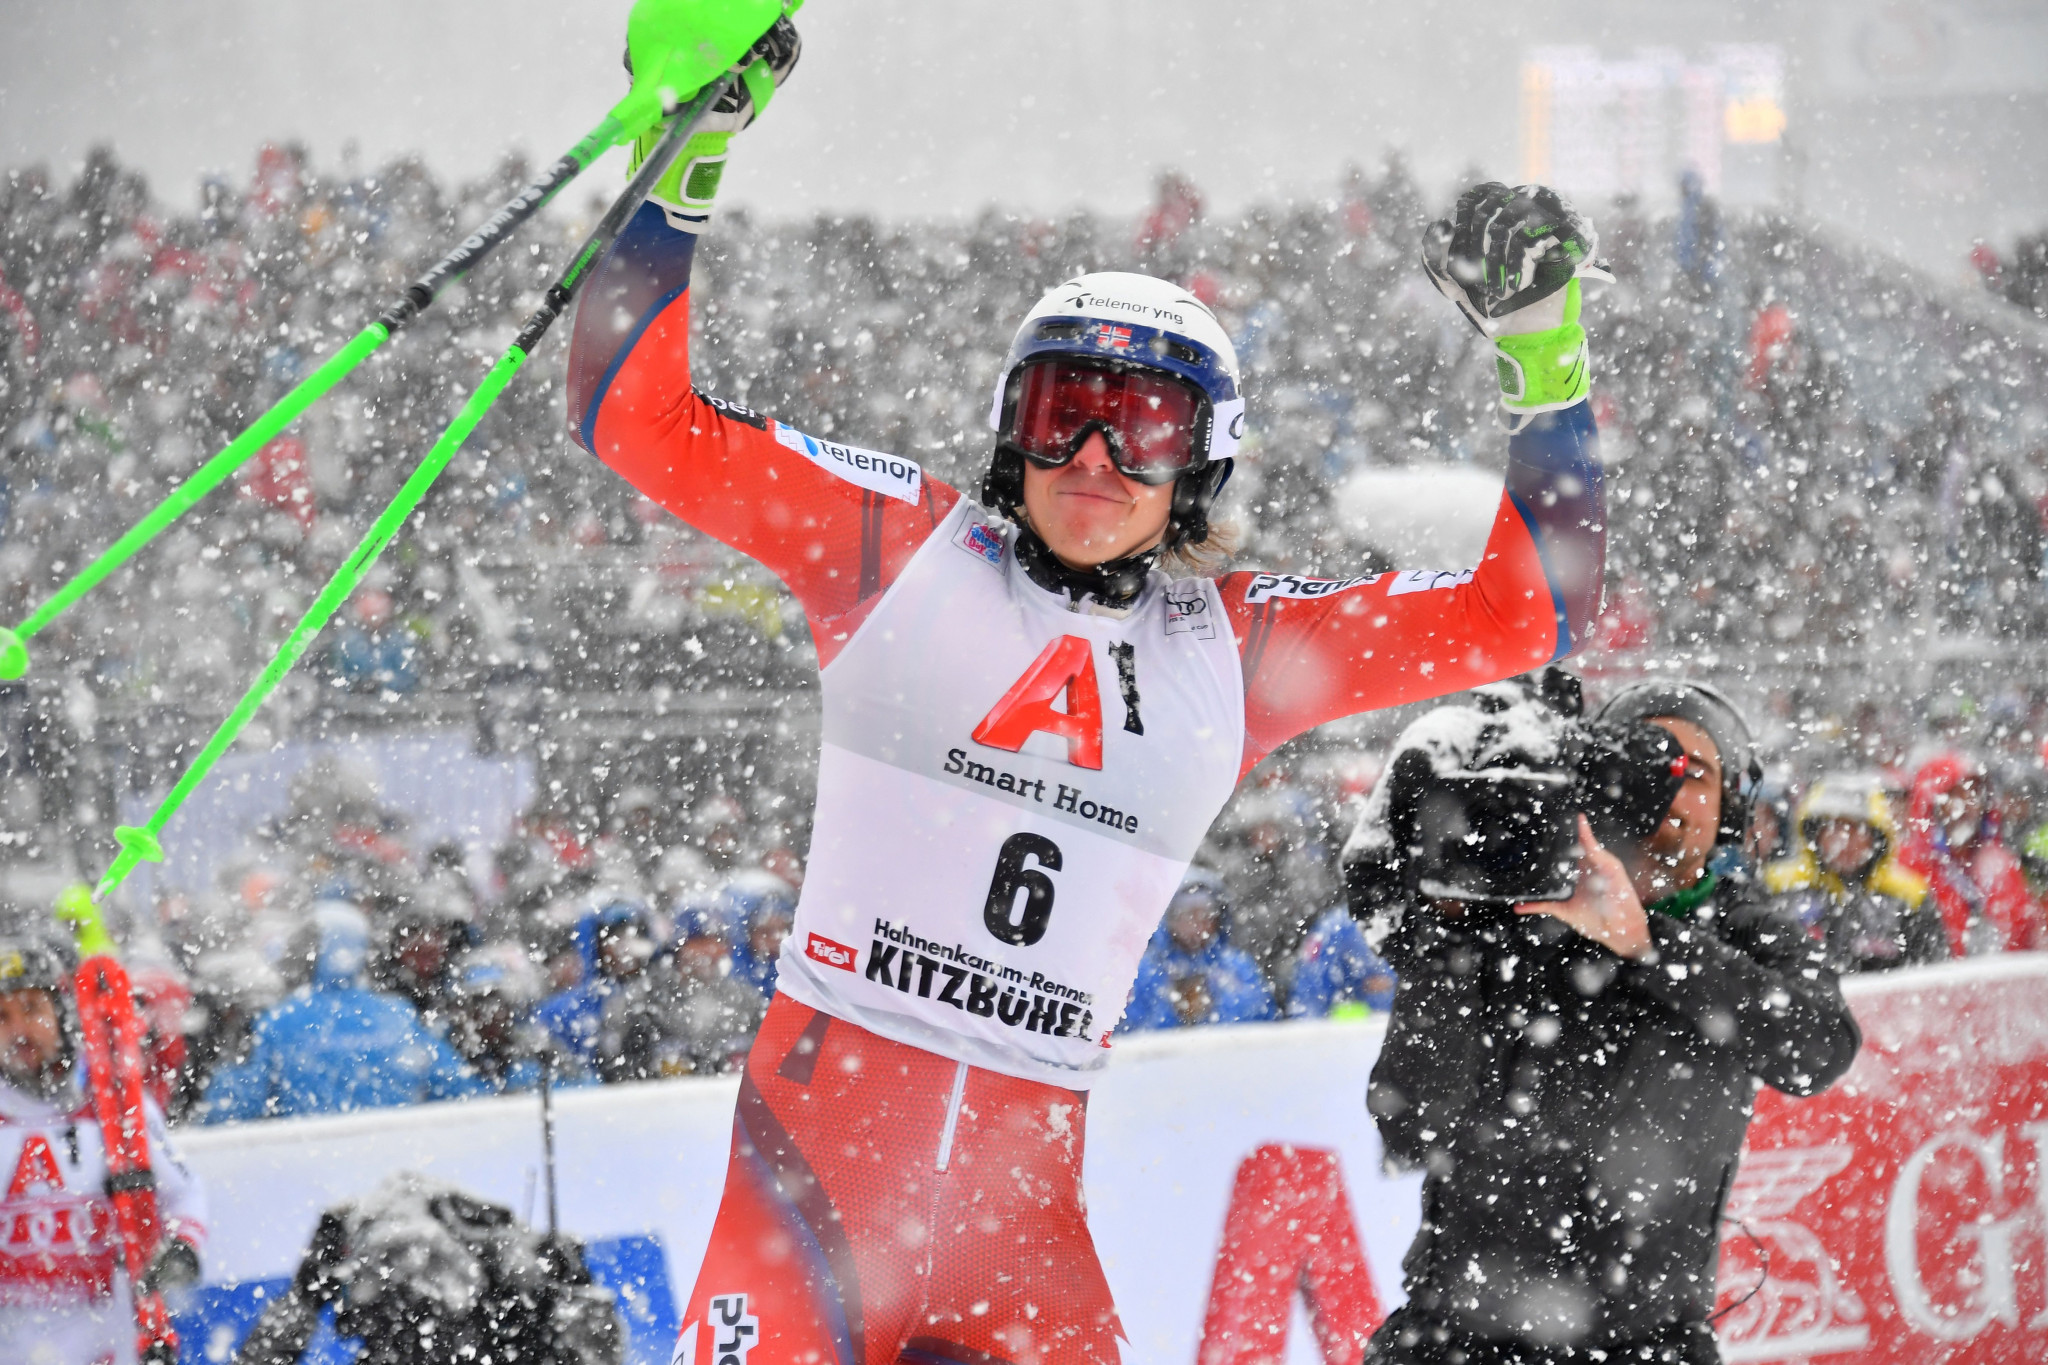 Kristoffersen claimed his first World Cup title of the season in Kitzbühel ©Getty Images